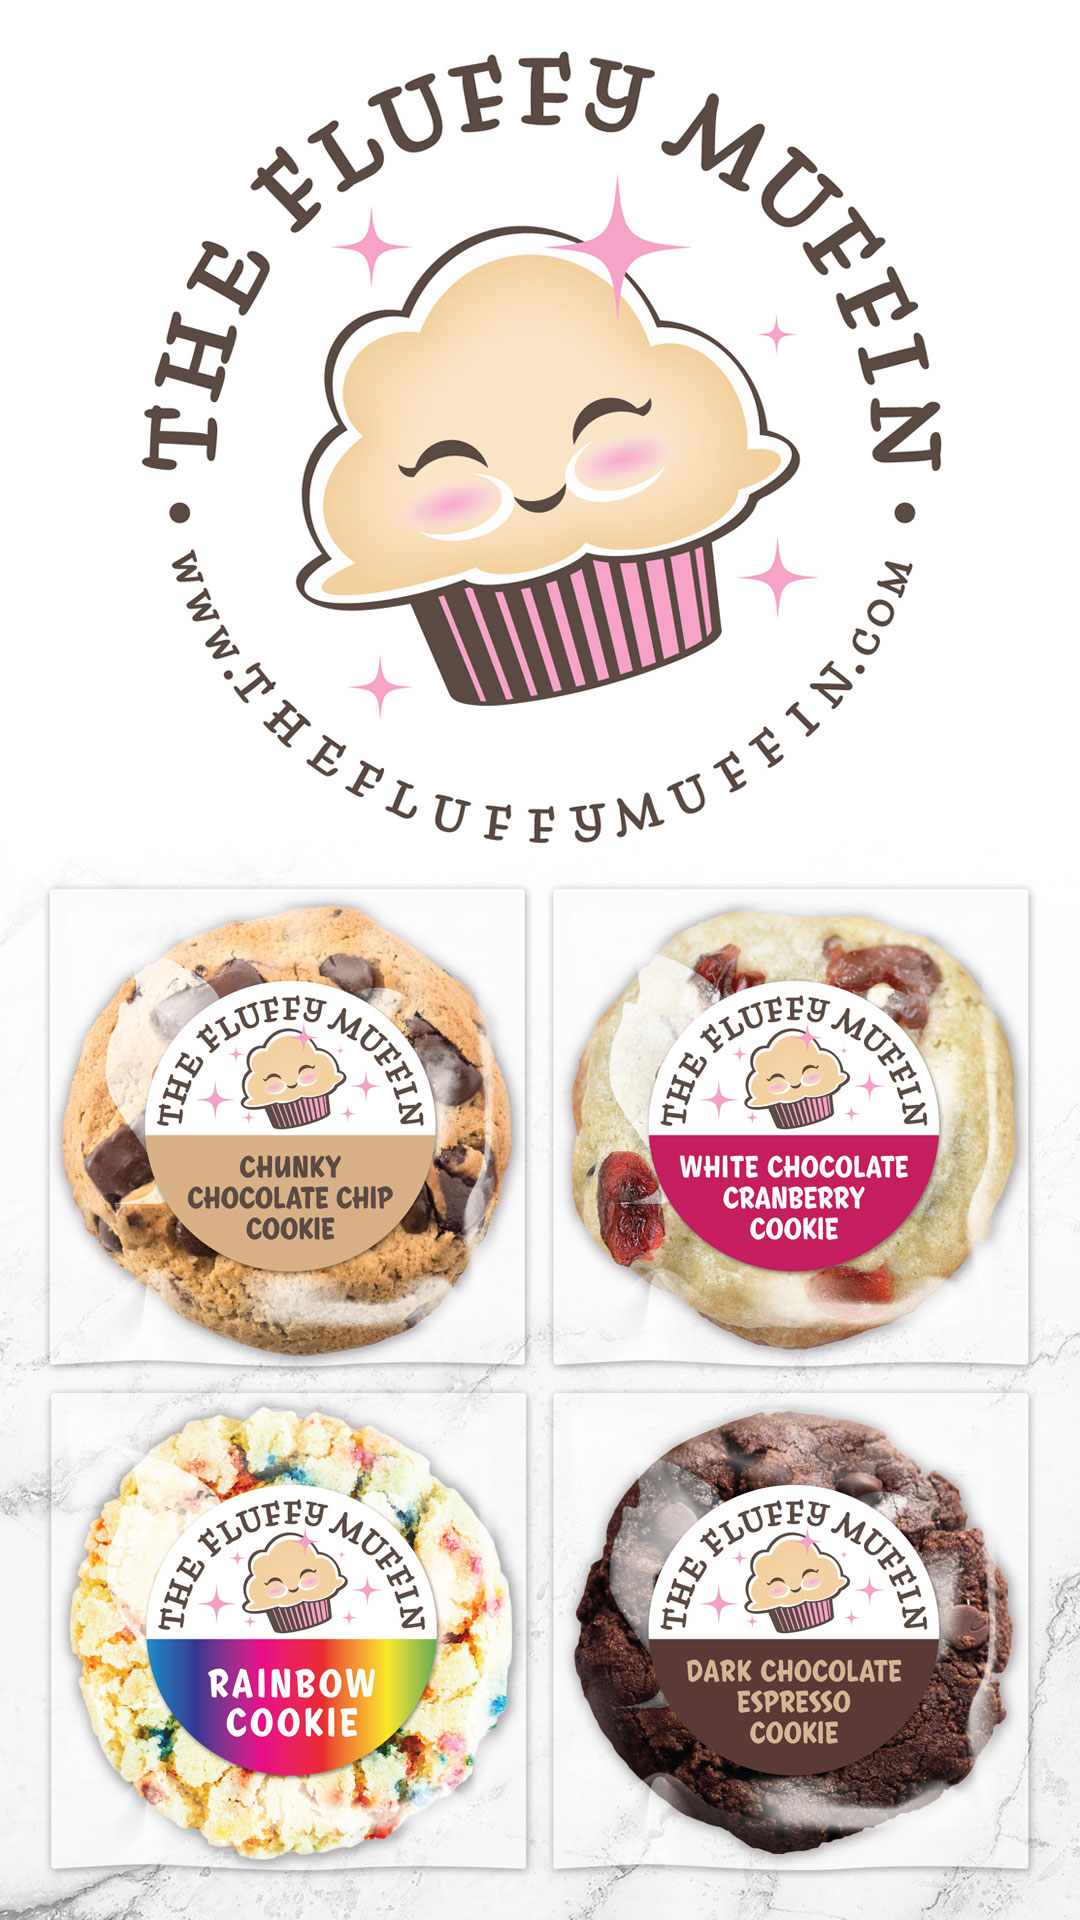 Fluffy Muffin Logo and packaging